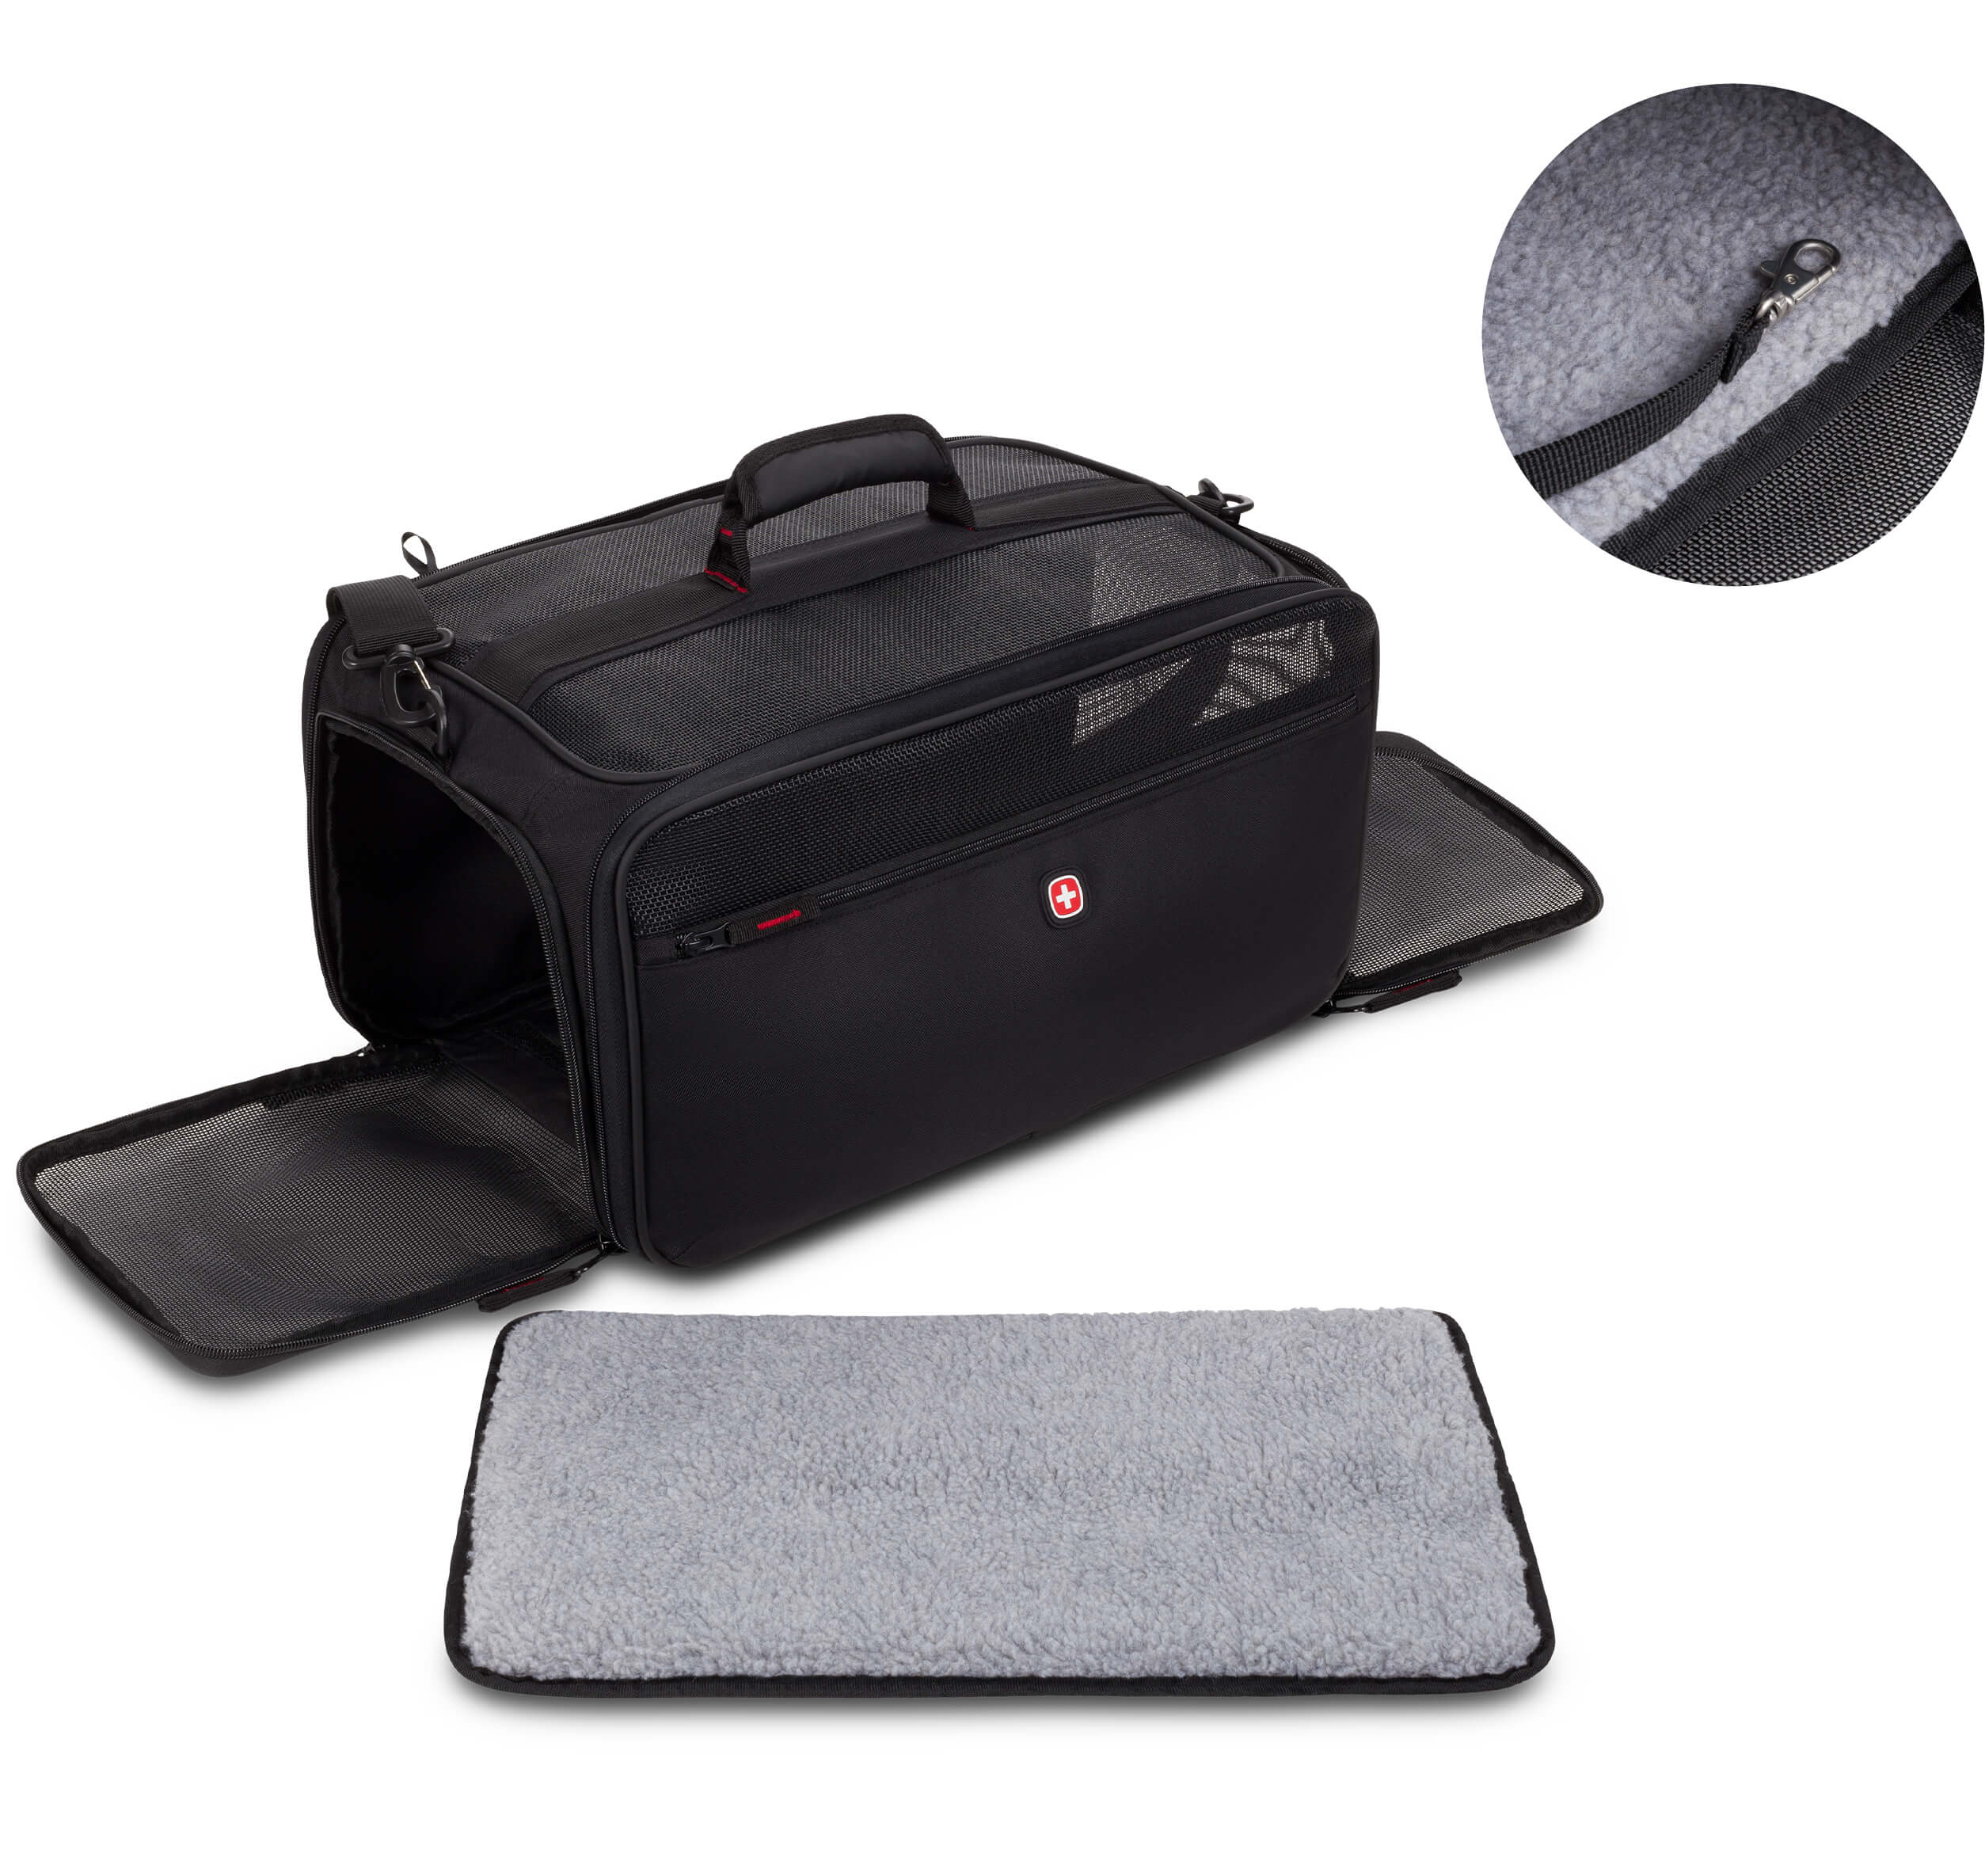 SWISSGEAR 3323 Carry-On Pet Carrier - Open View with feature callouts